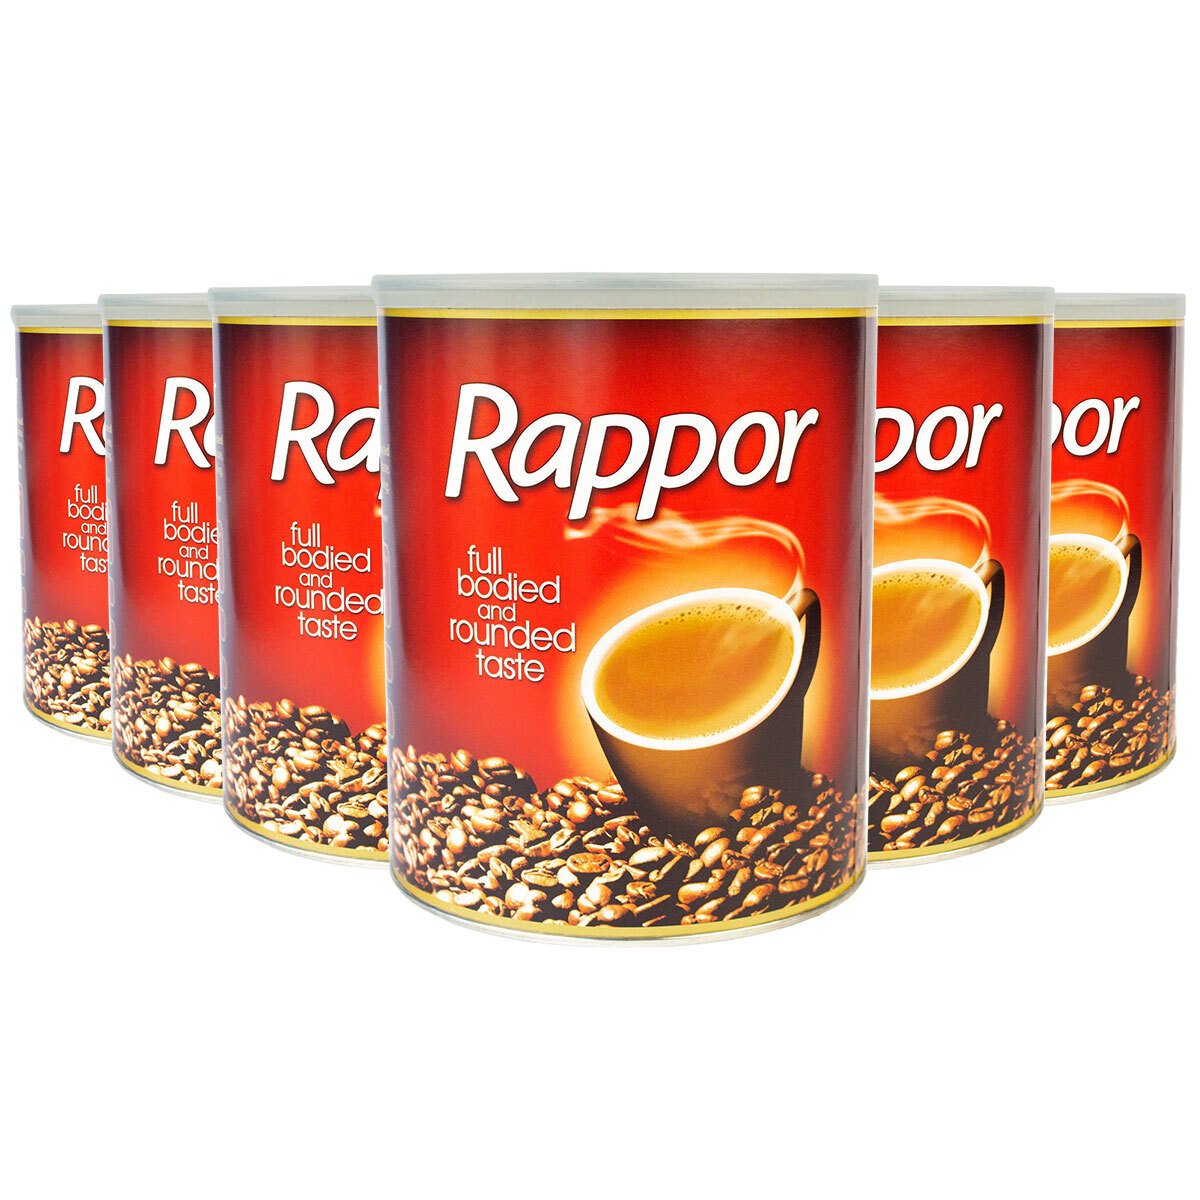 Cut out image of multiple rappor coffee's on white background